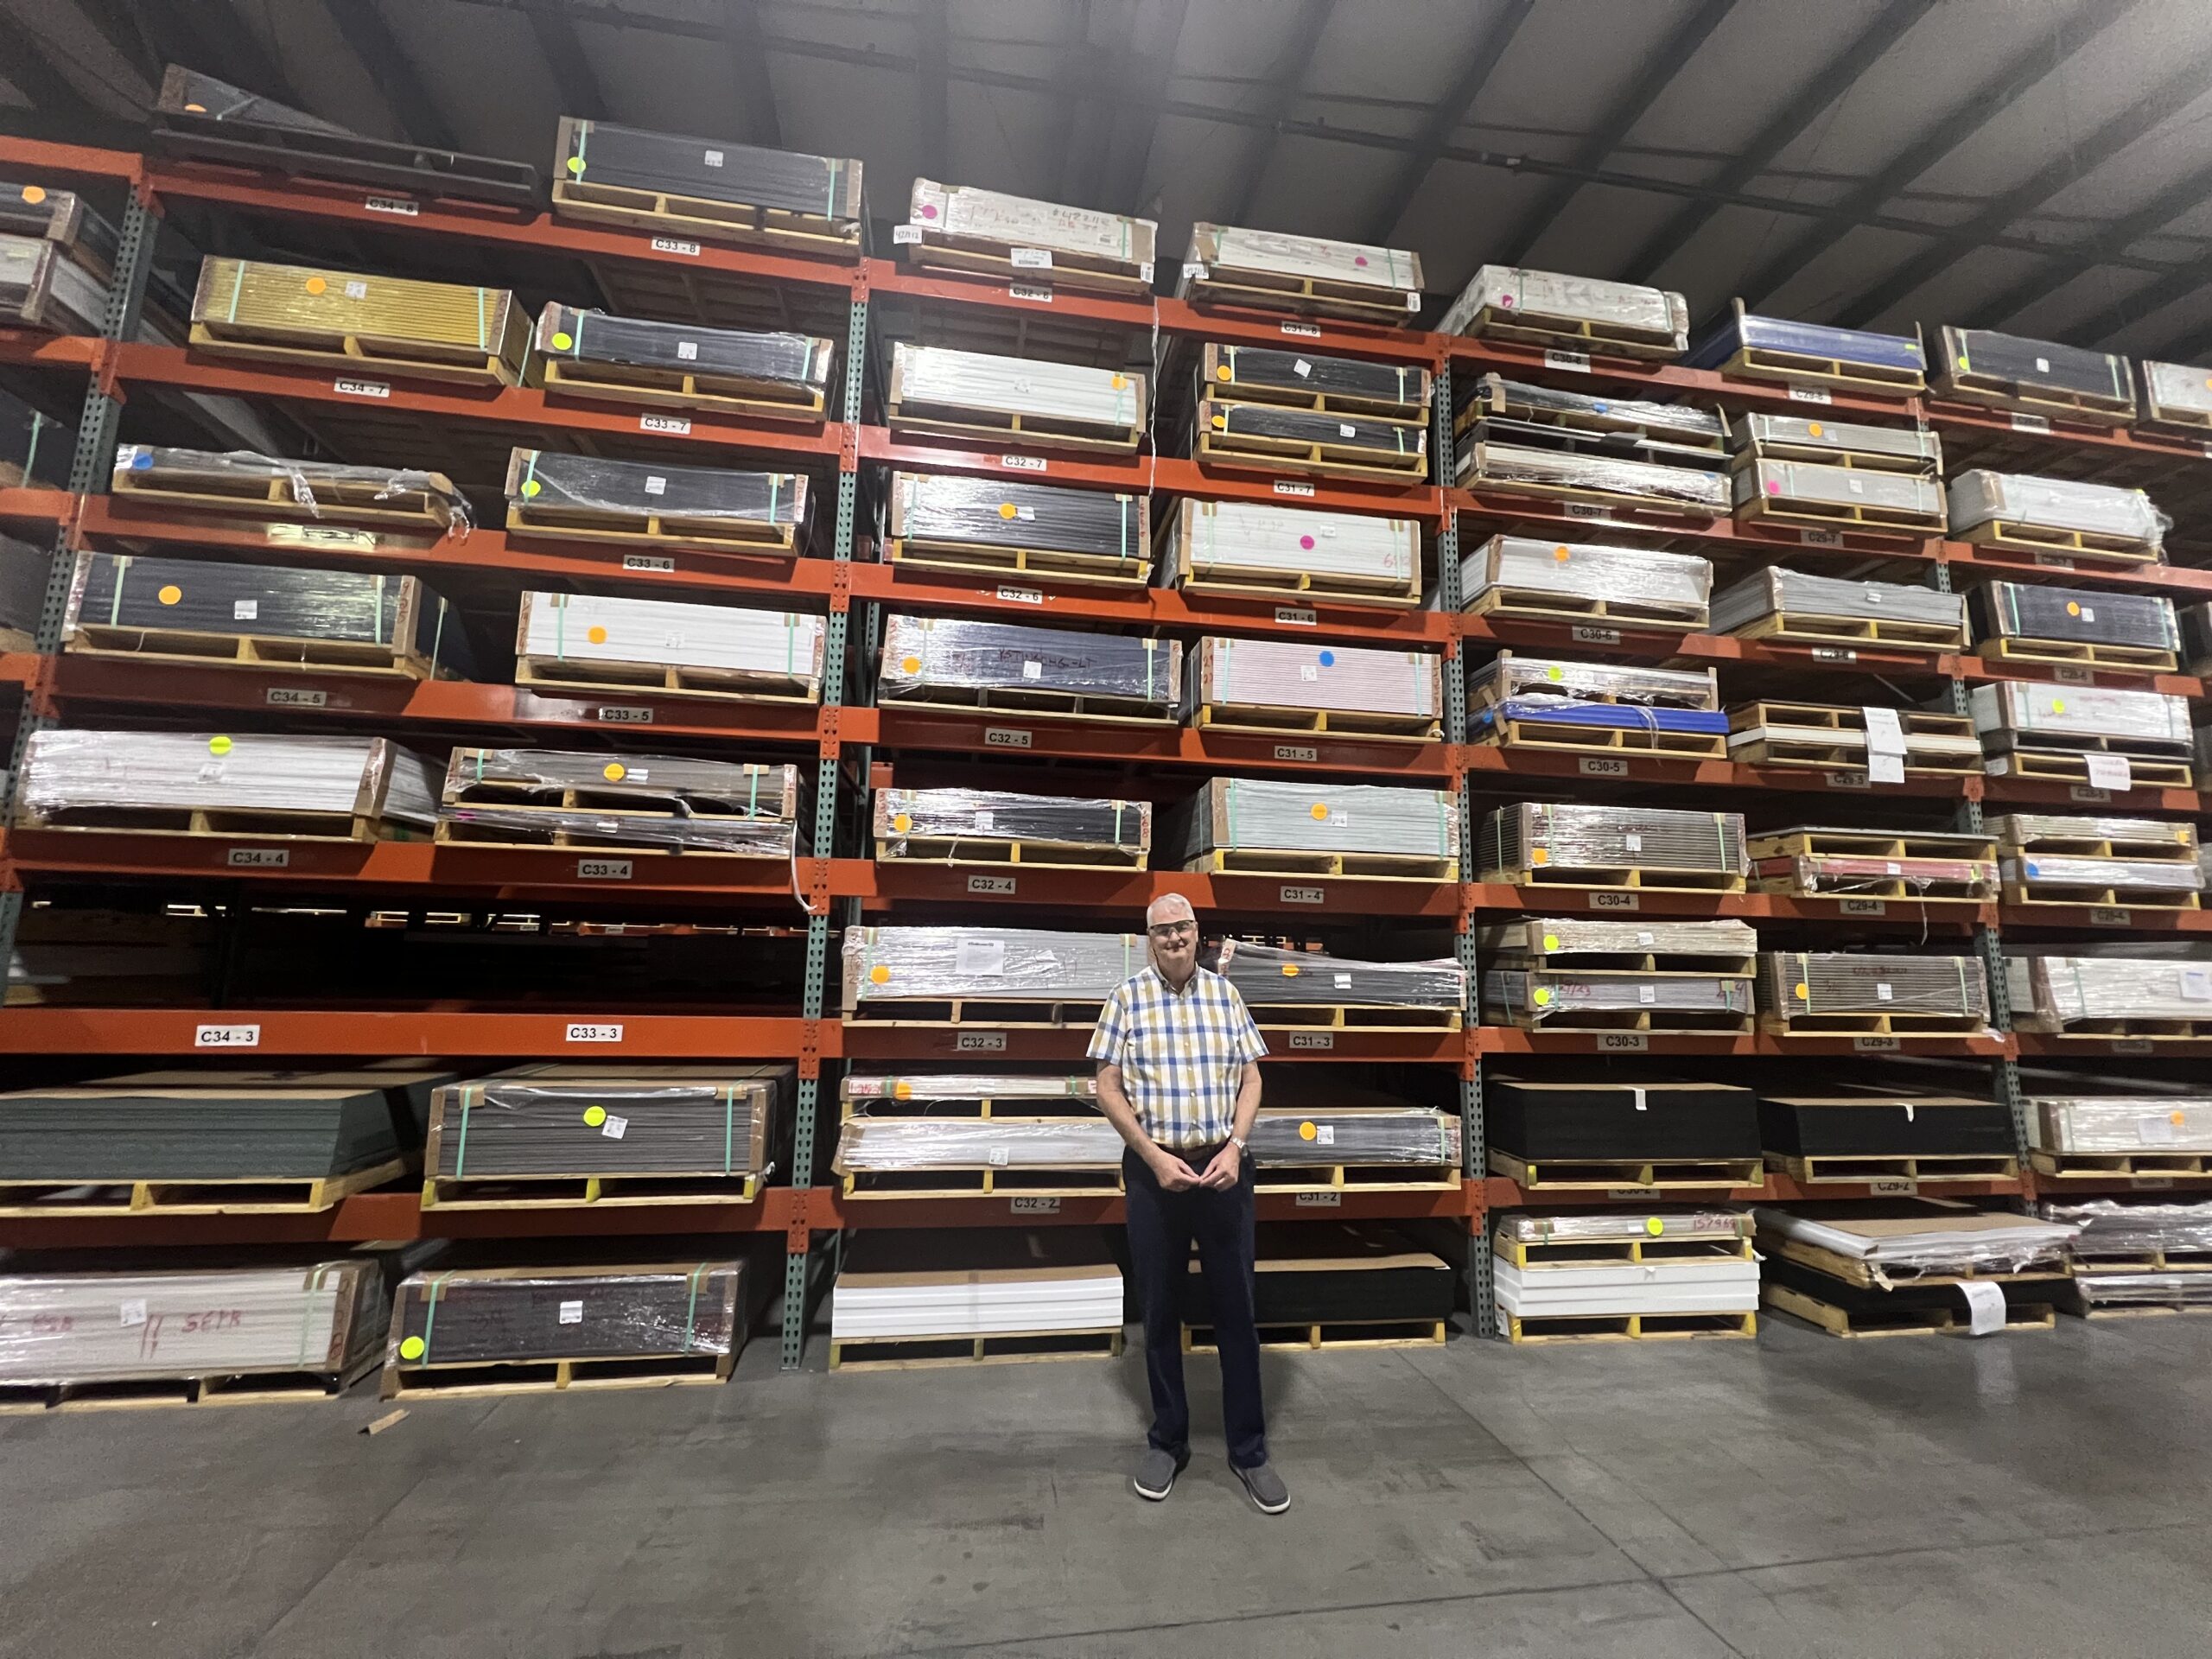 Although Jeffrey King stands at 6-feet 5-inches tall, the shelves in his warehouse tower above him. SUN PHOTO BY DANIEL FINTON